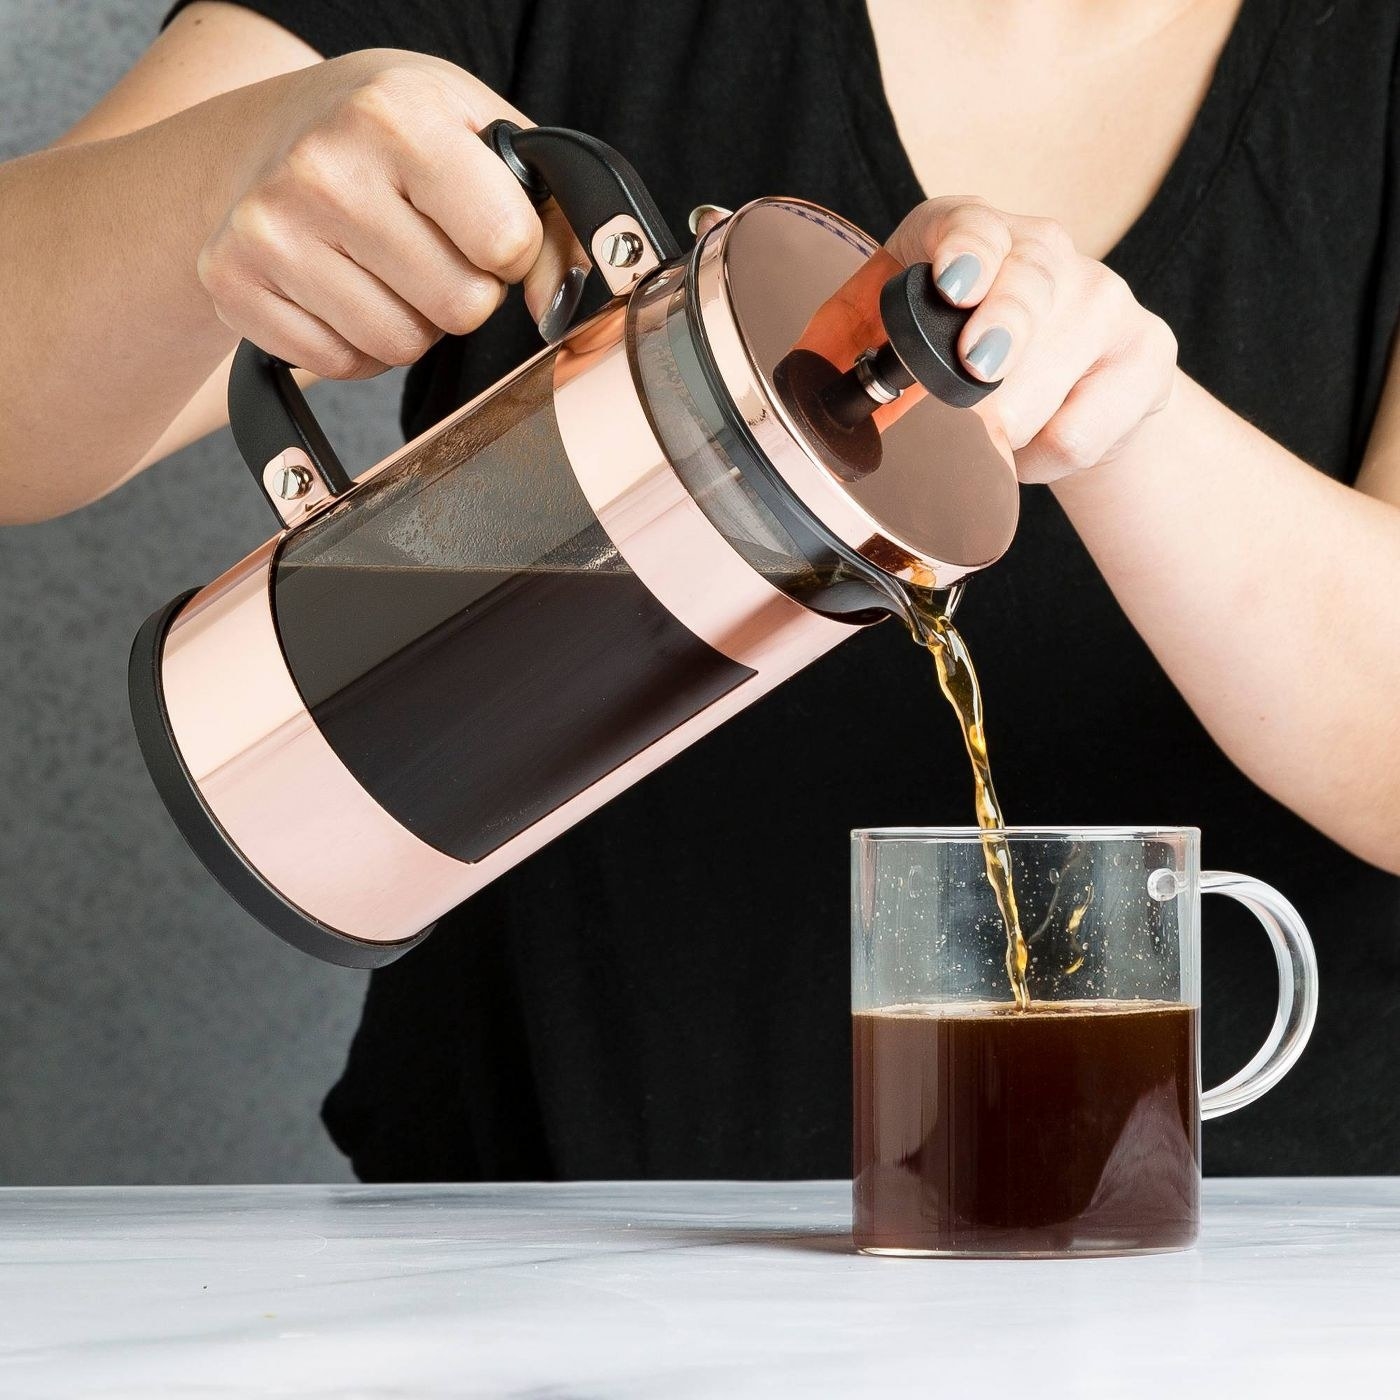 A model pours coffee from the copper french press into a glass mug